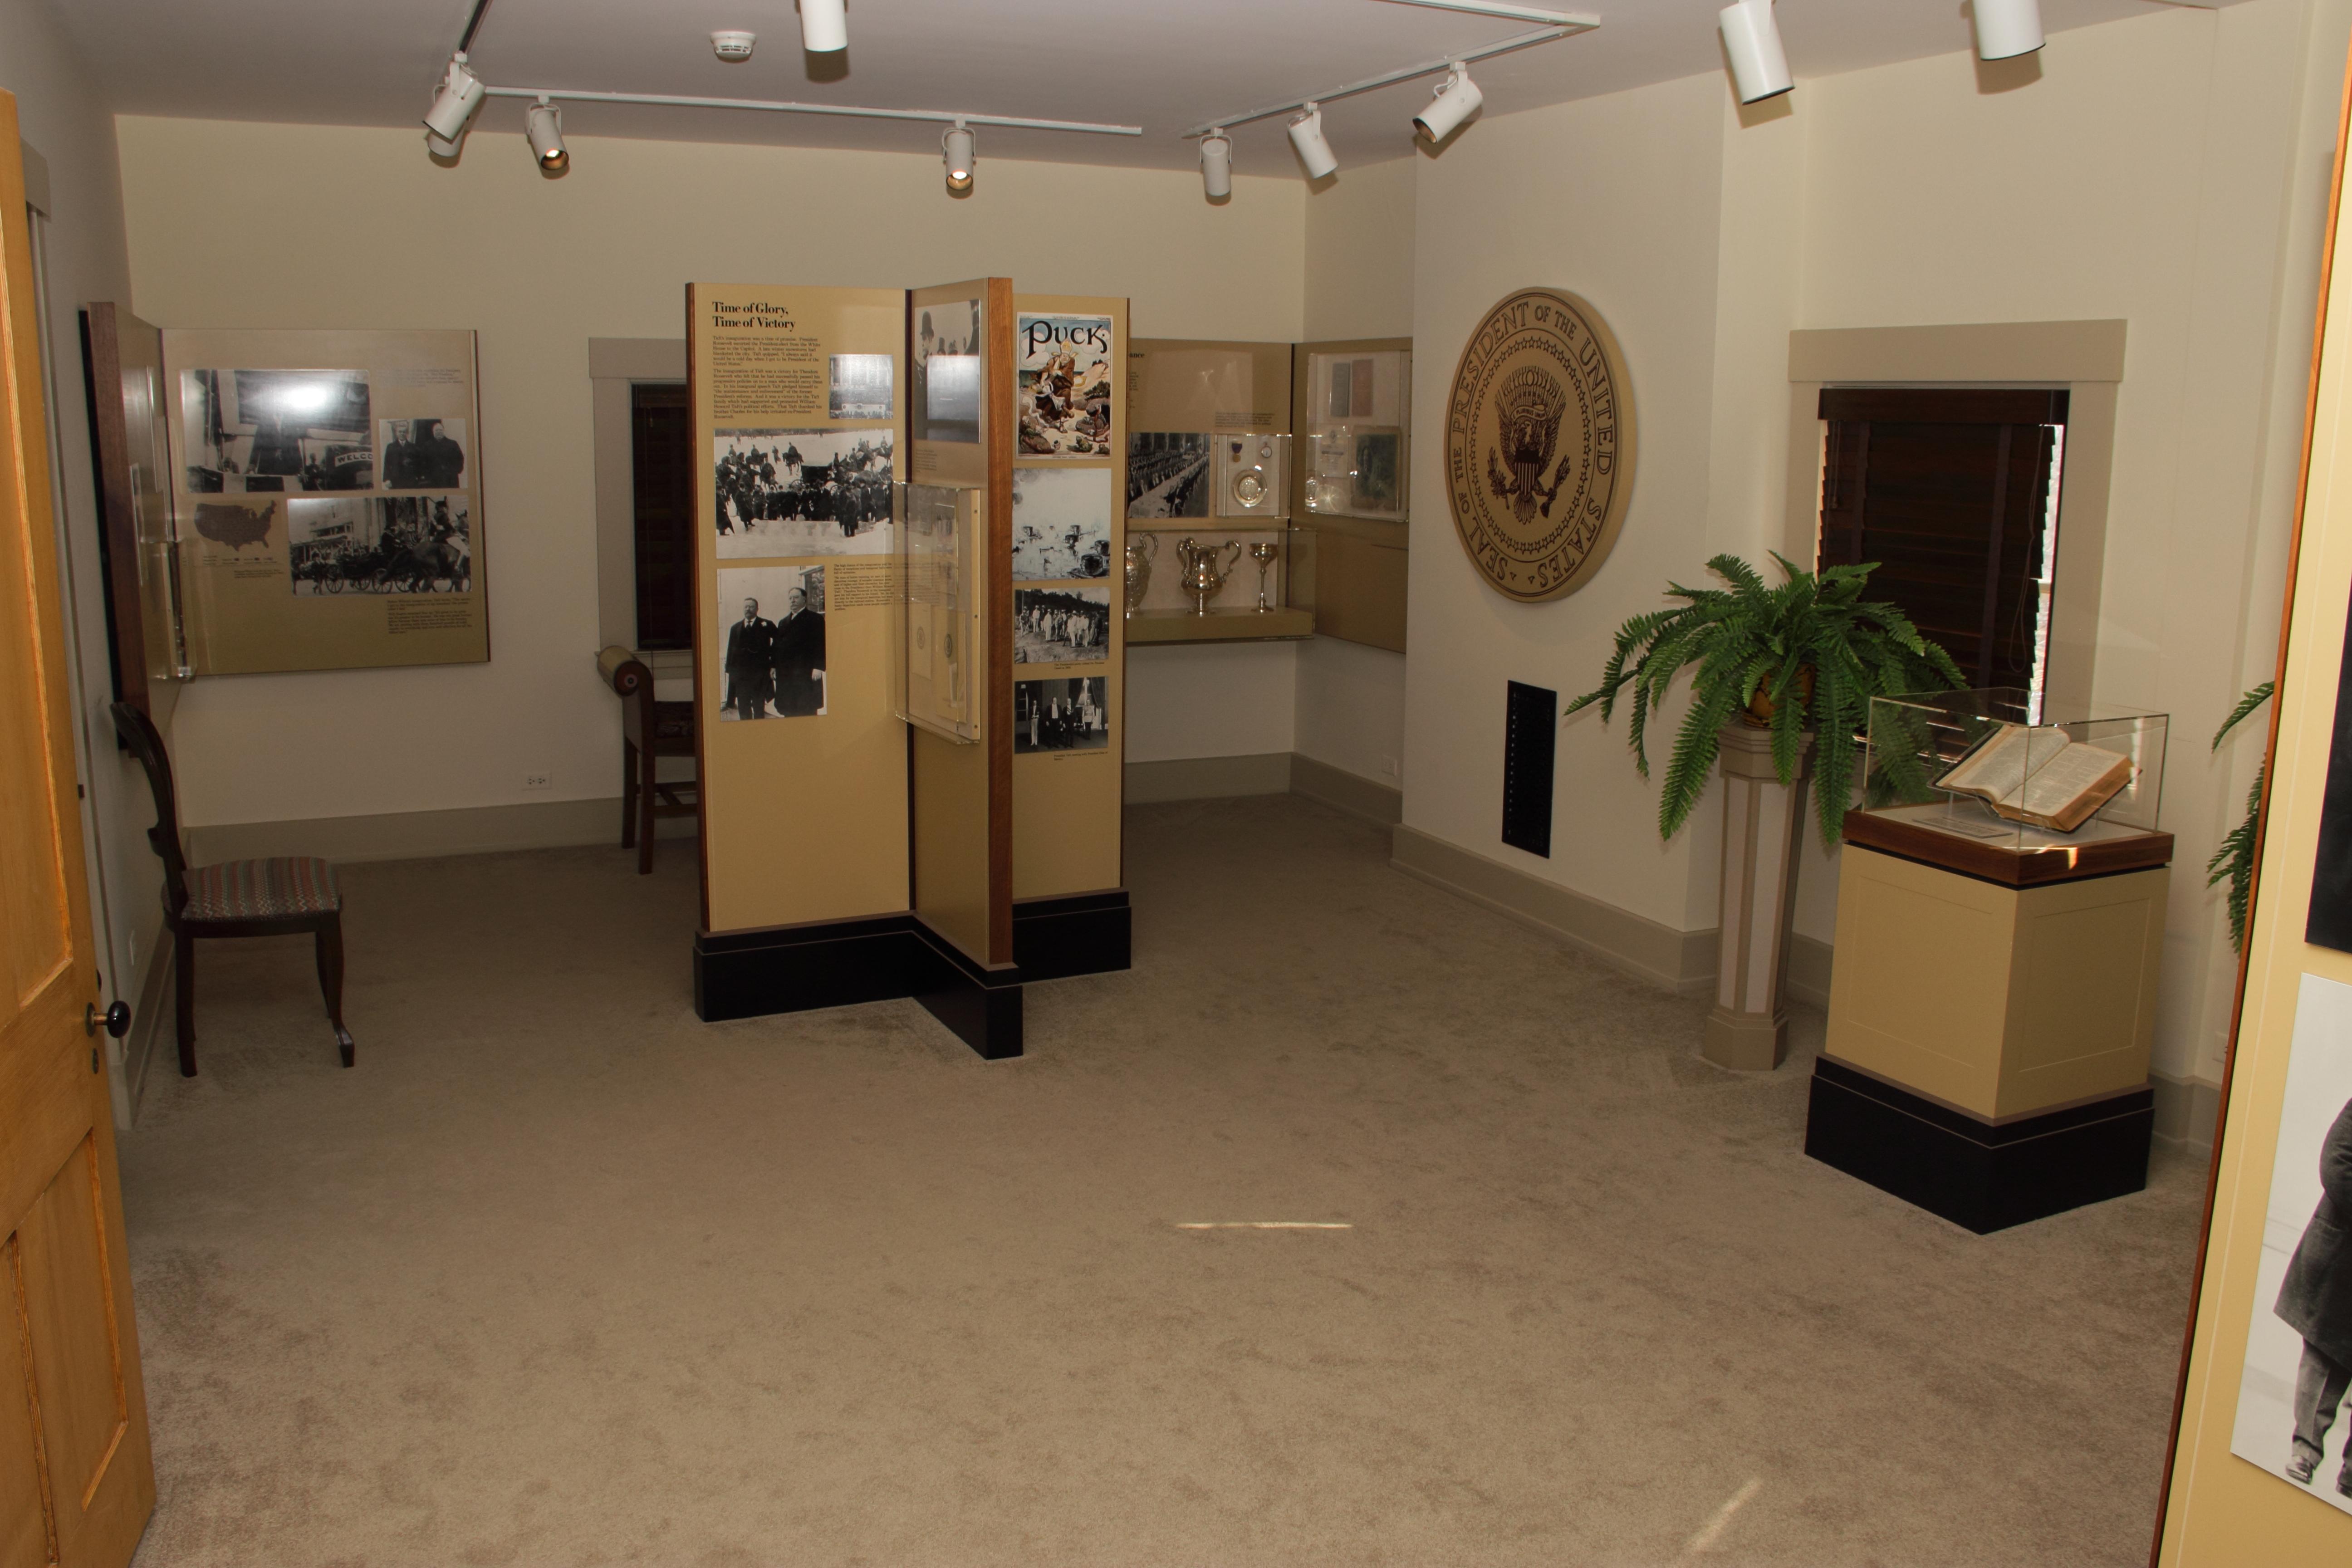 A large room with individual columns of artifacts and display items in the center and wall displays